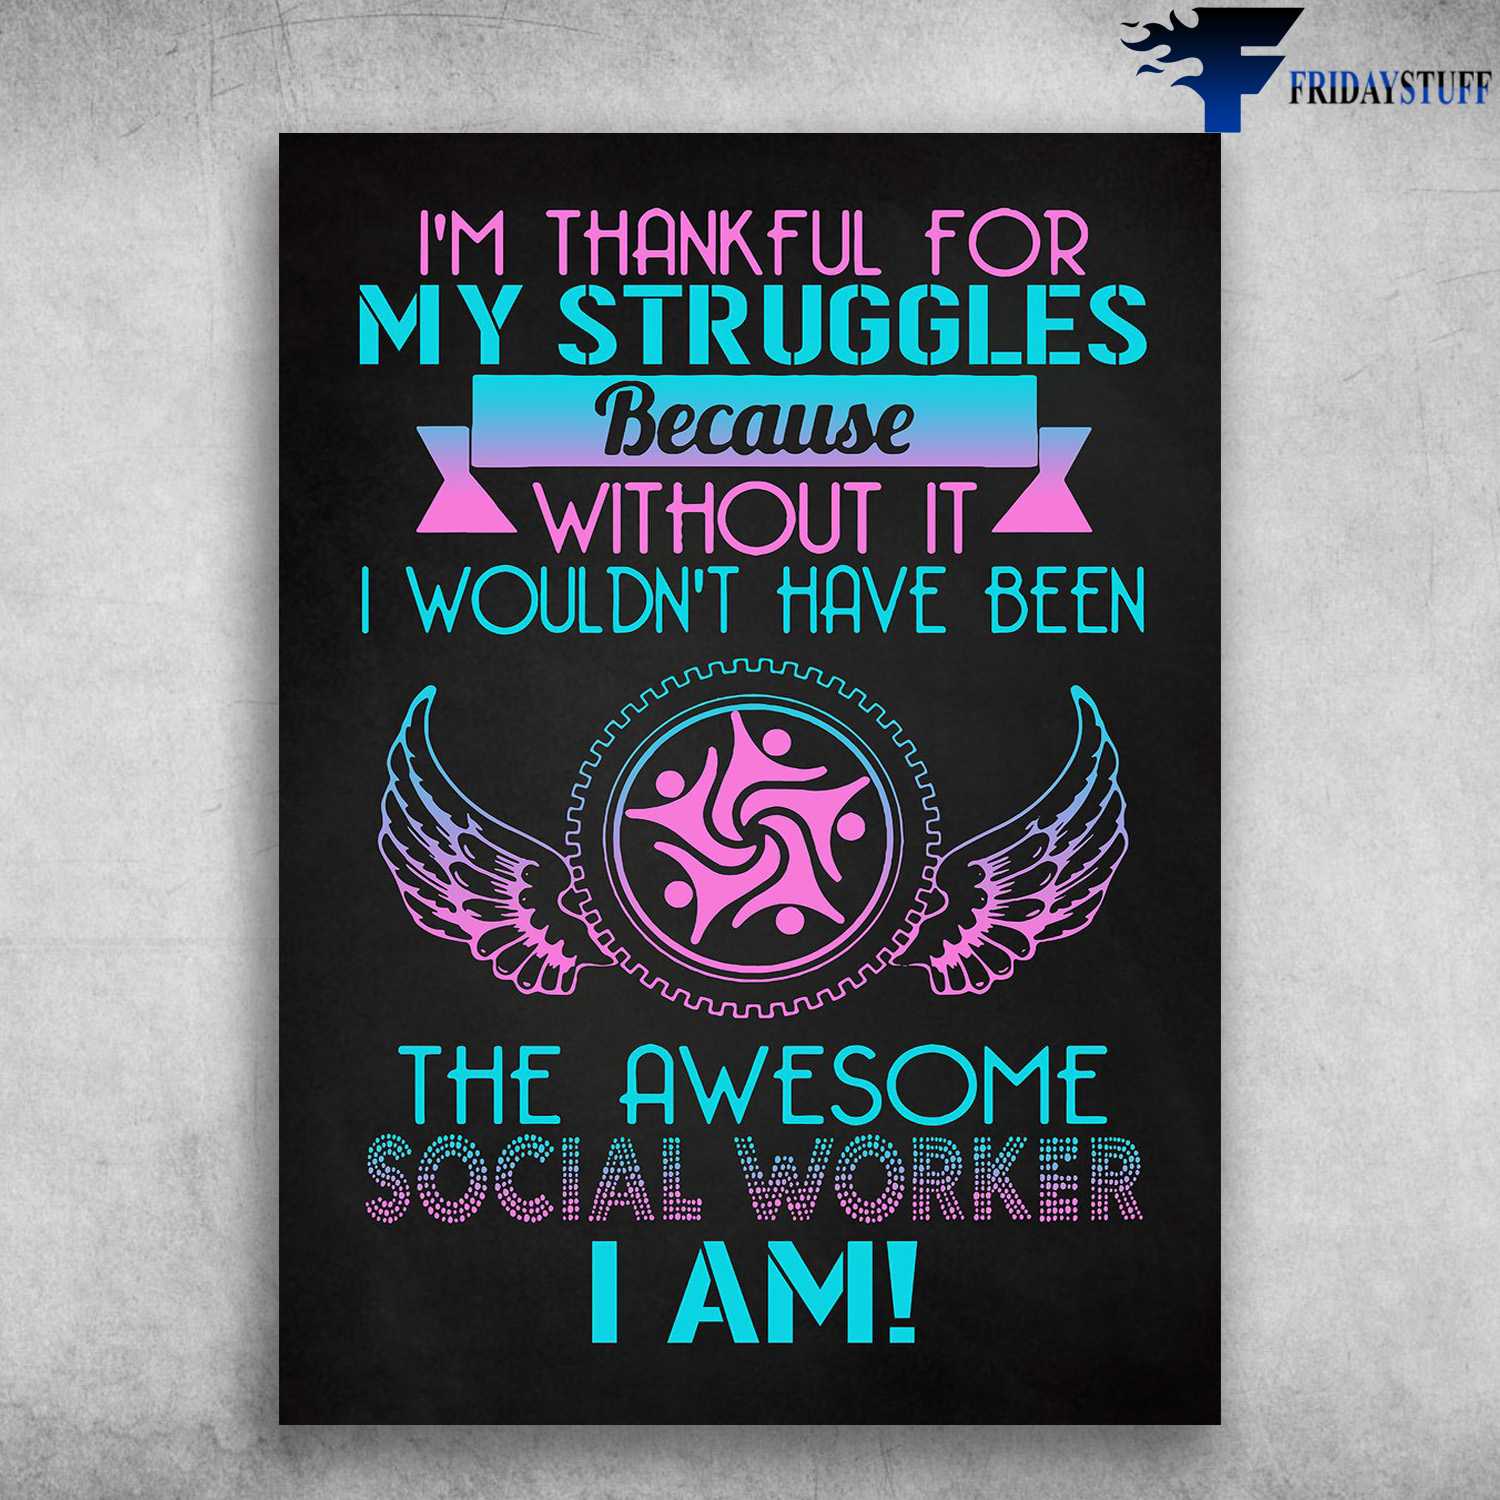 Social Worker - I'm Thankful For My Struggles, Because Without It, I Wouldn't Have Been, The Social Worker I Am